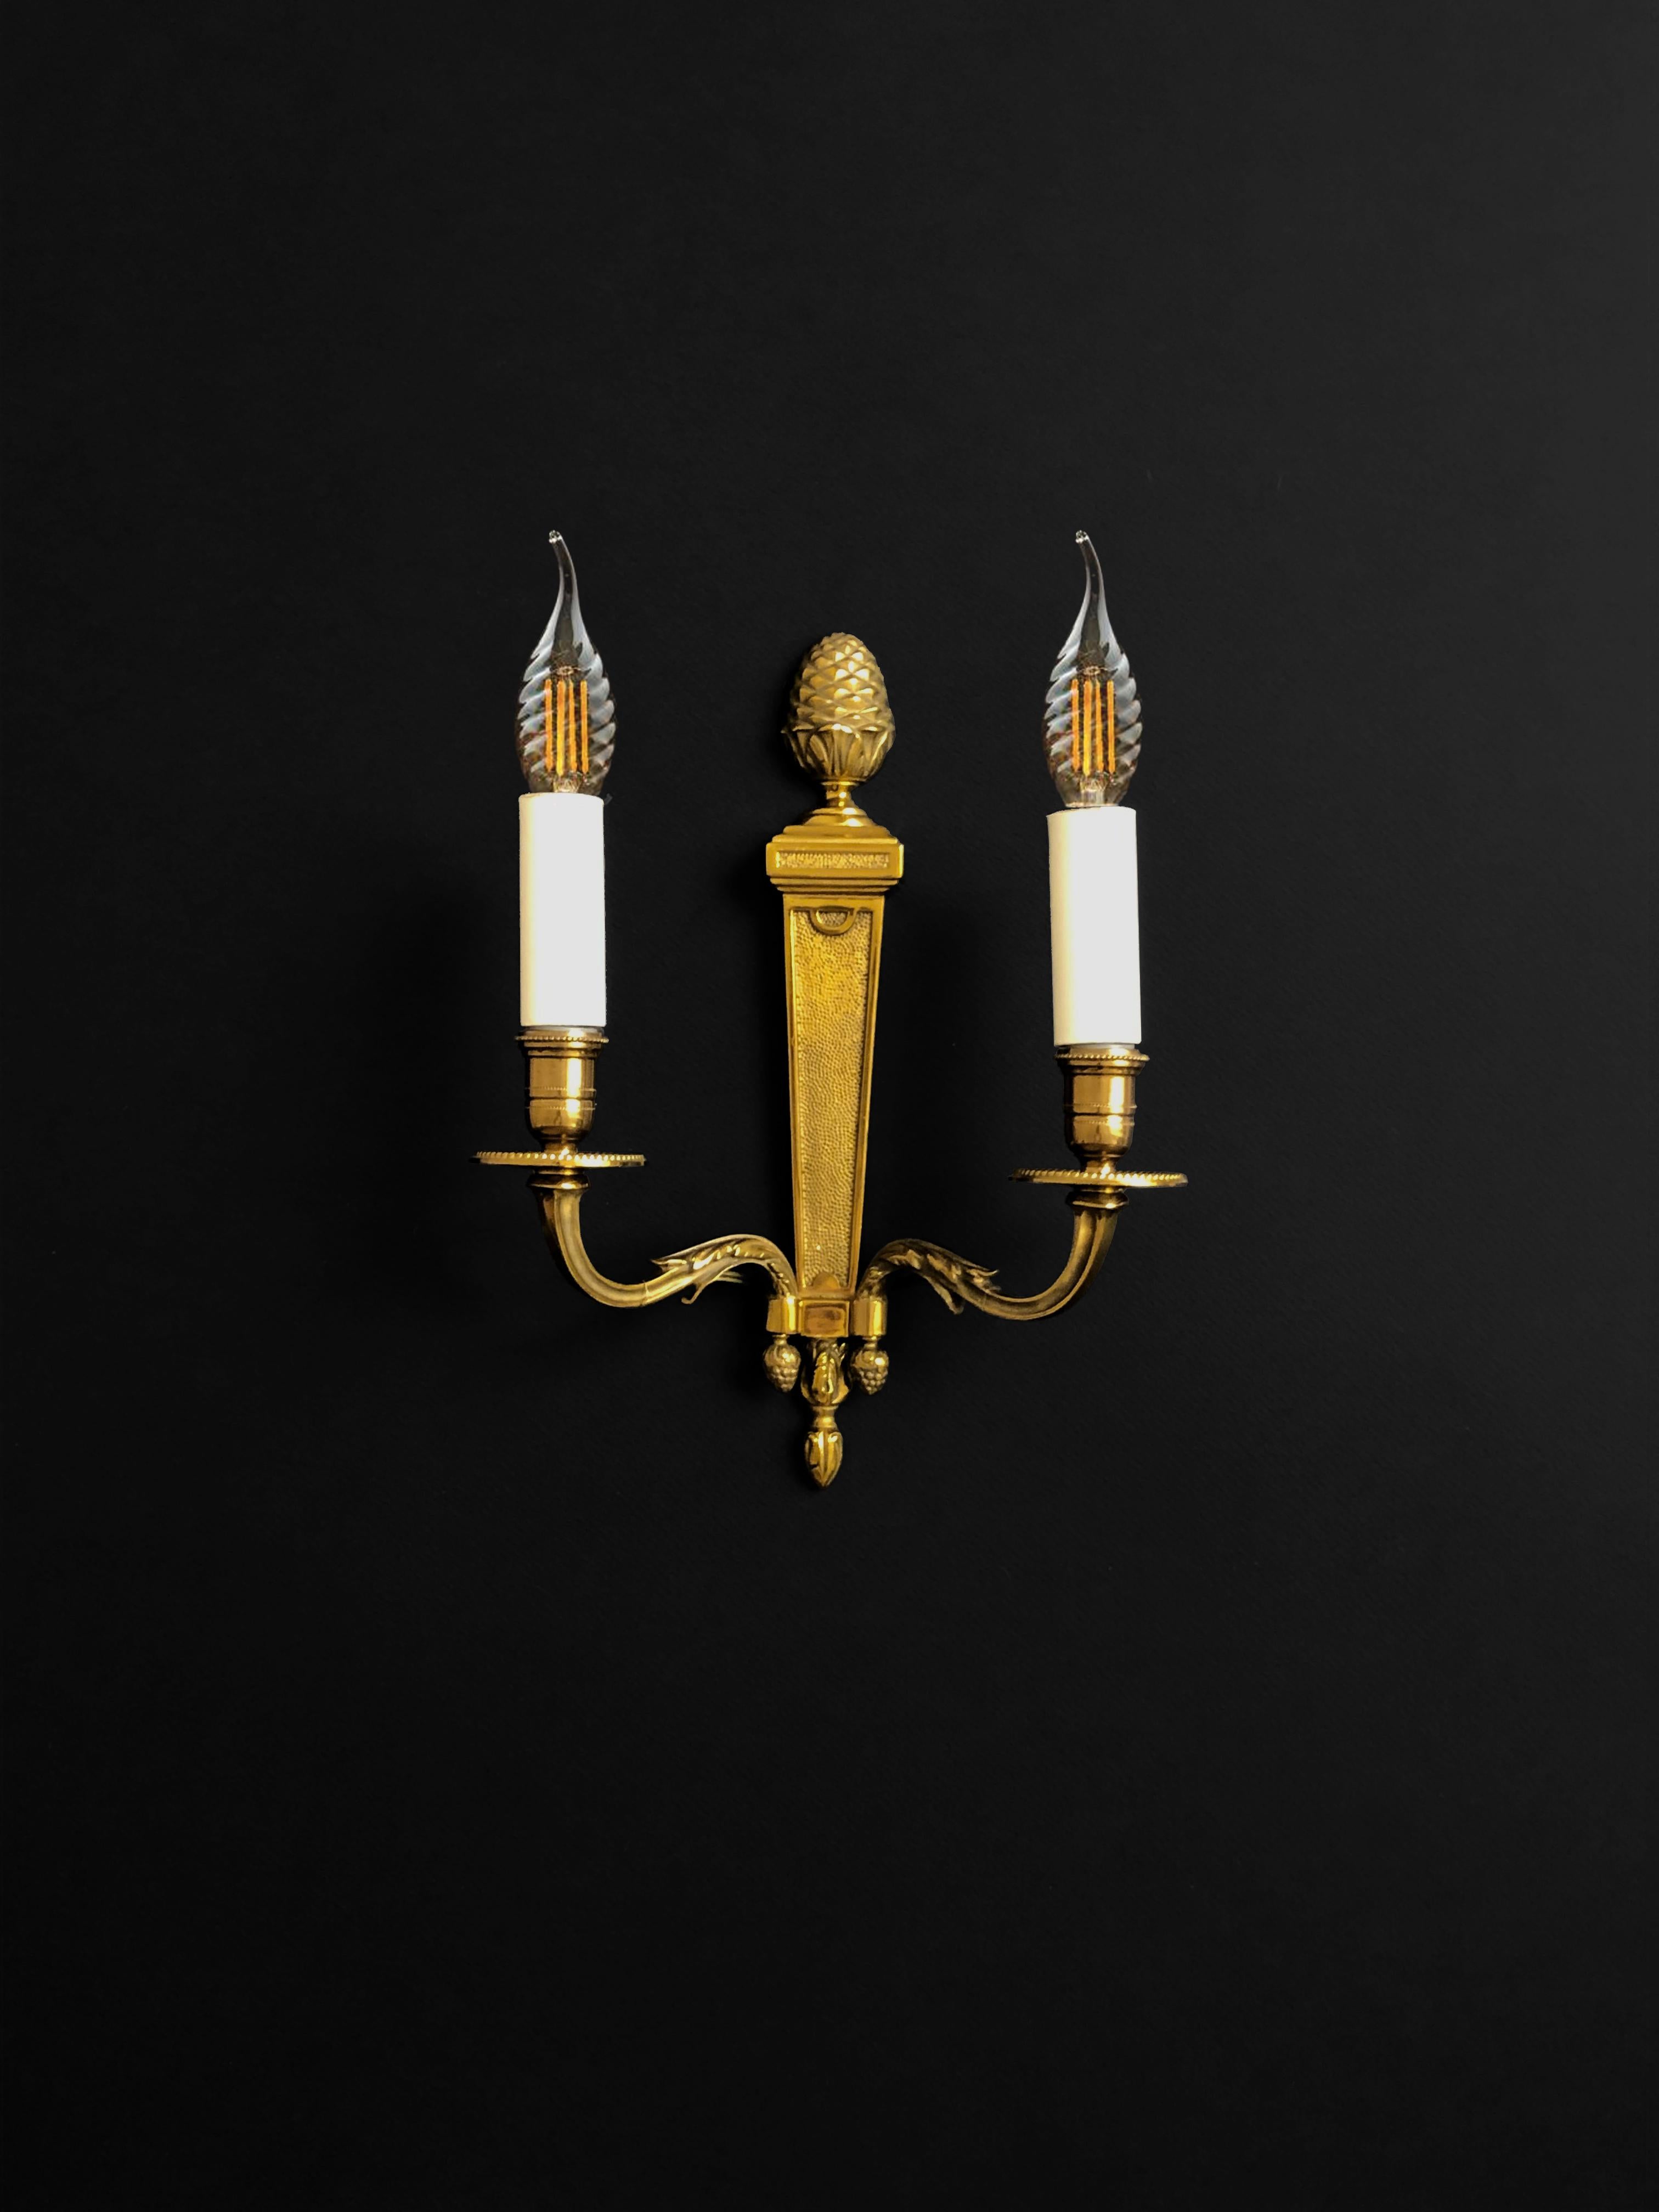 An elegant and luxurious wall light with 2 arms of light, Empire, Art-Deco, Neo-Classic, Shabby-Chic, classic body with 2 arms with very refined bronze decorations, Maison Baguès, France 1960-1970.

We pictured this applique with decorative bulbs